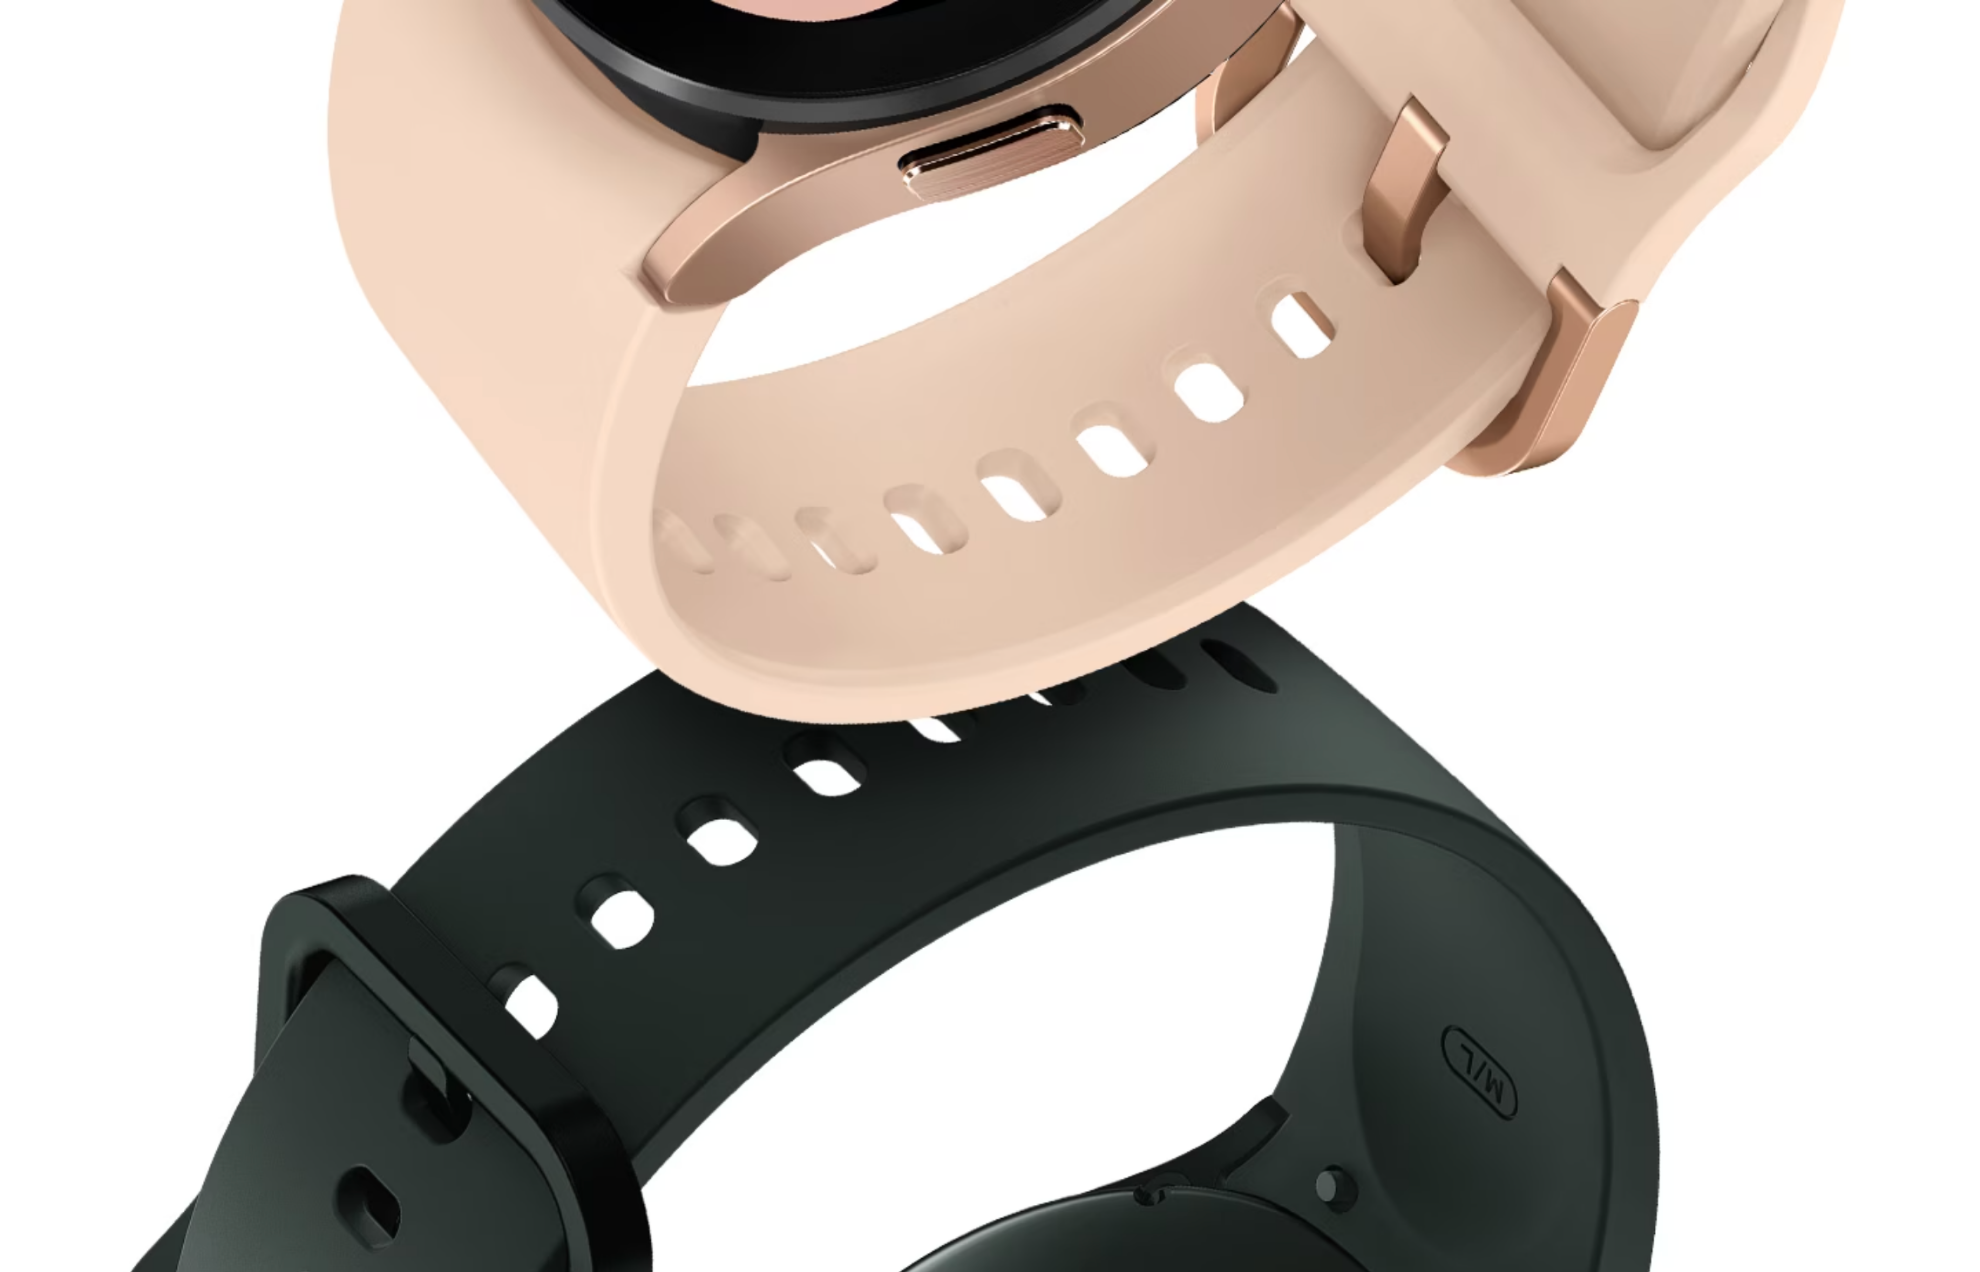 A Galaxy Watch4 with a Pink Gold color sport band is shown on top. On the bottom is another Galaxy Watch4 with a Green color sport band.